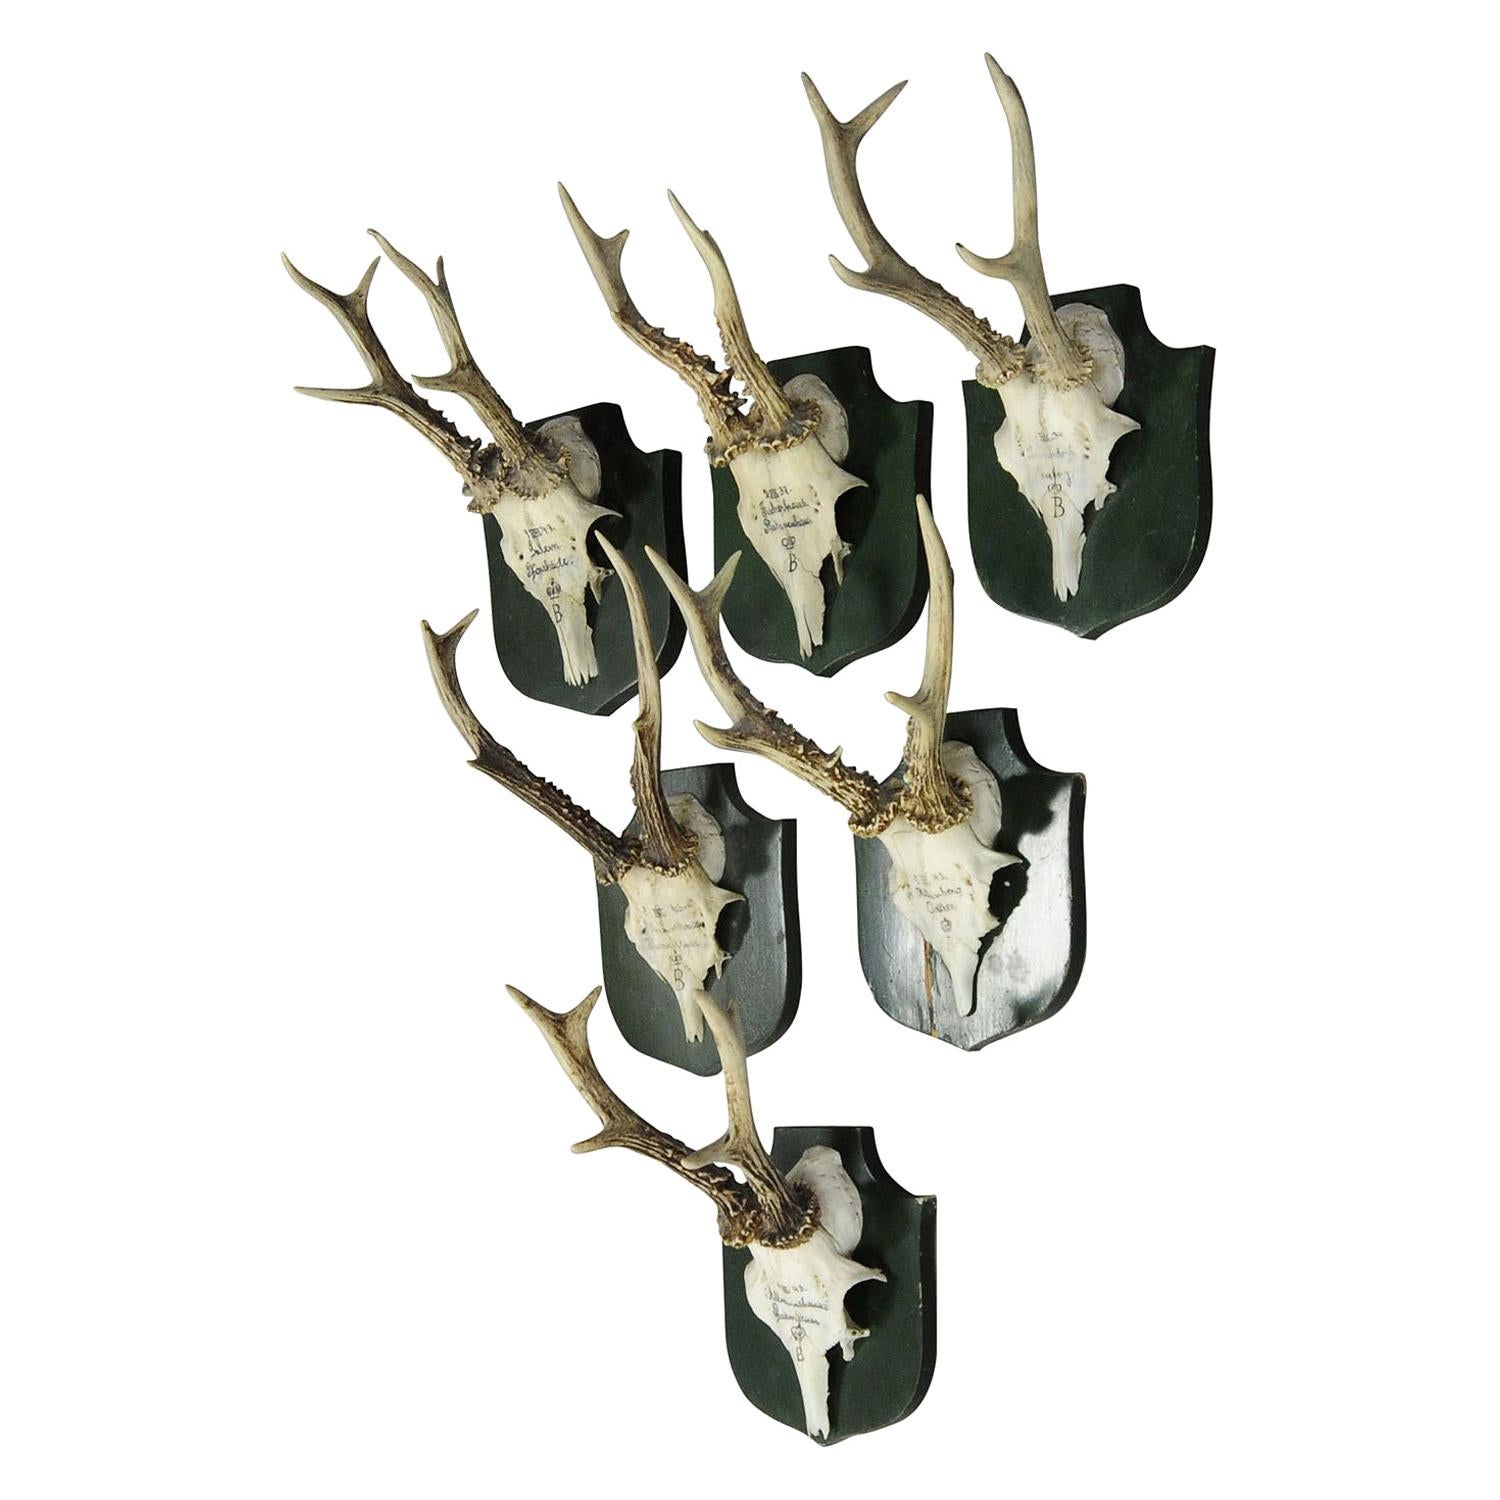 Set of Six Deer Trophies from Palace Salem, Germany